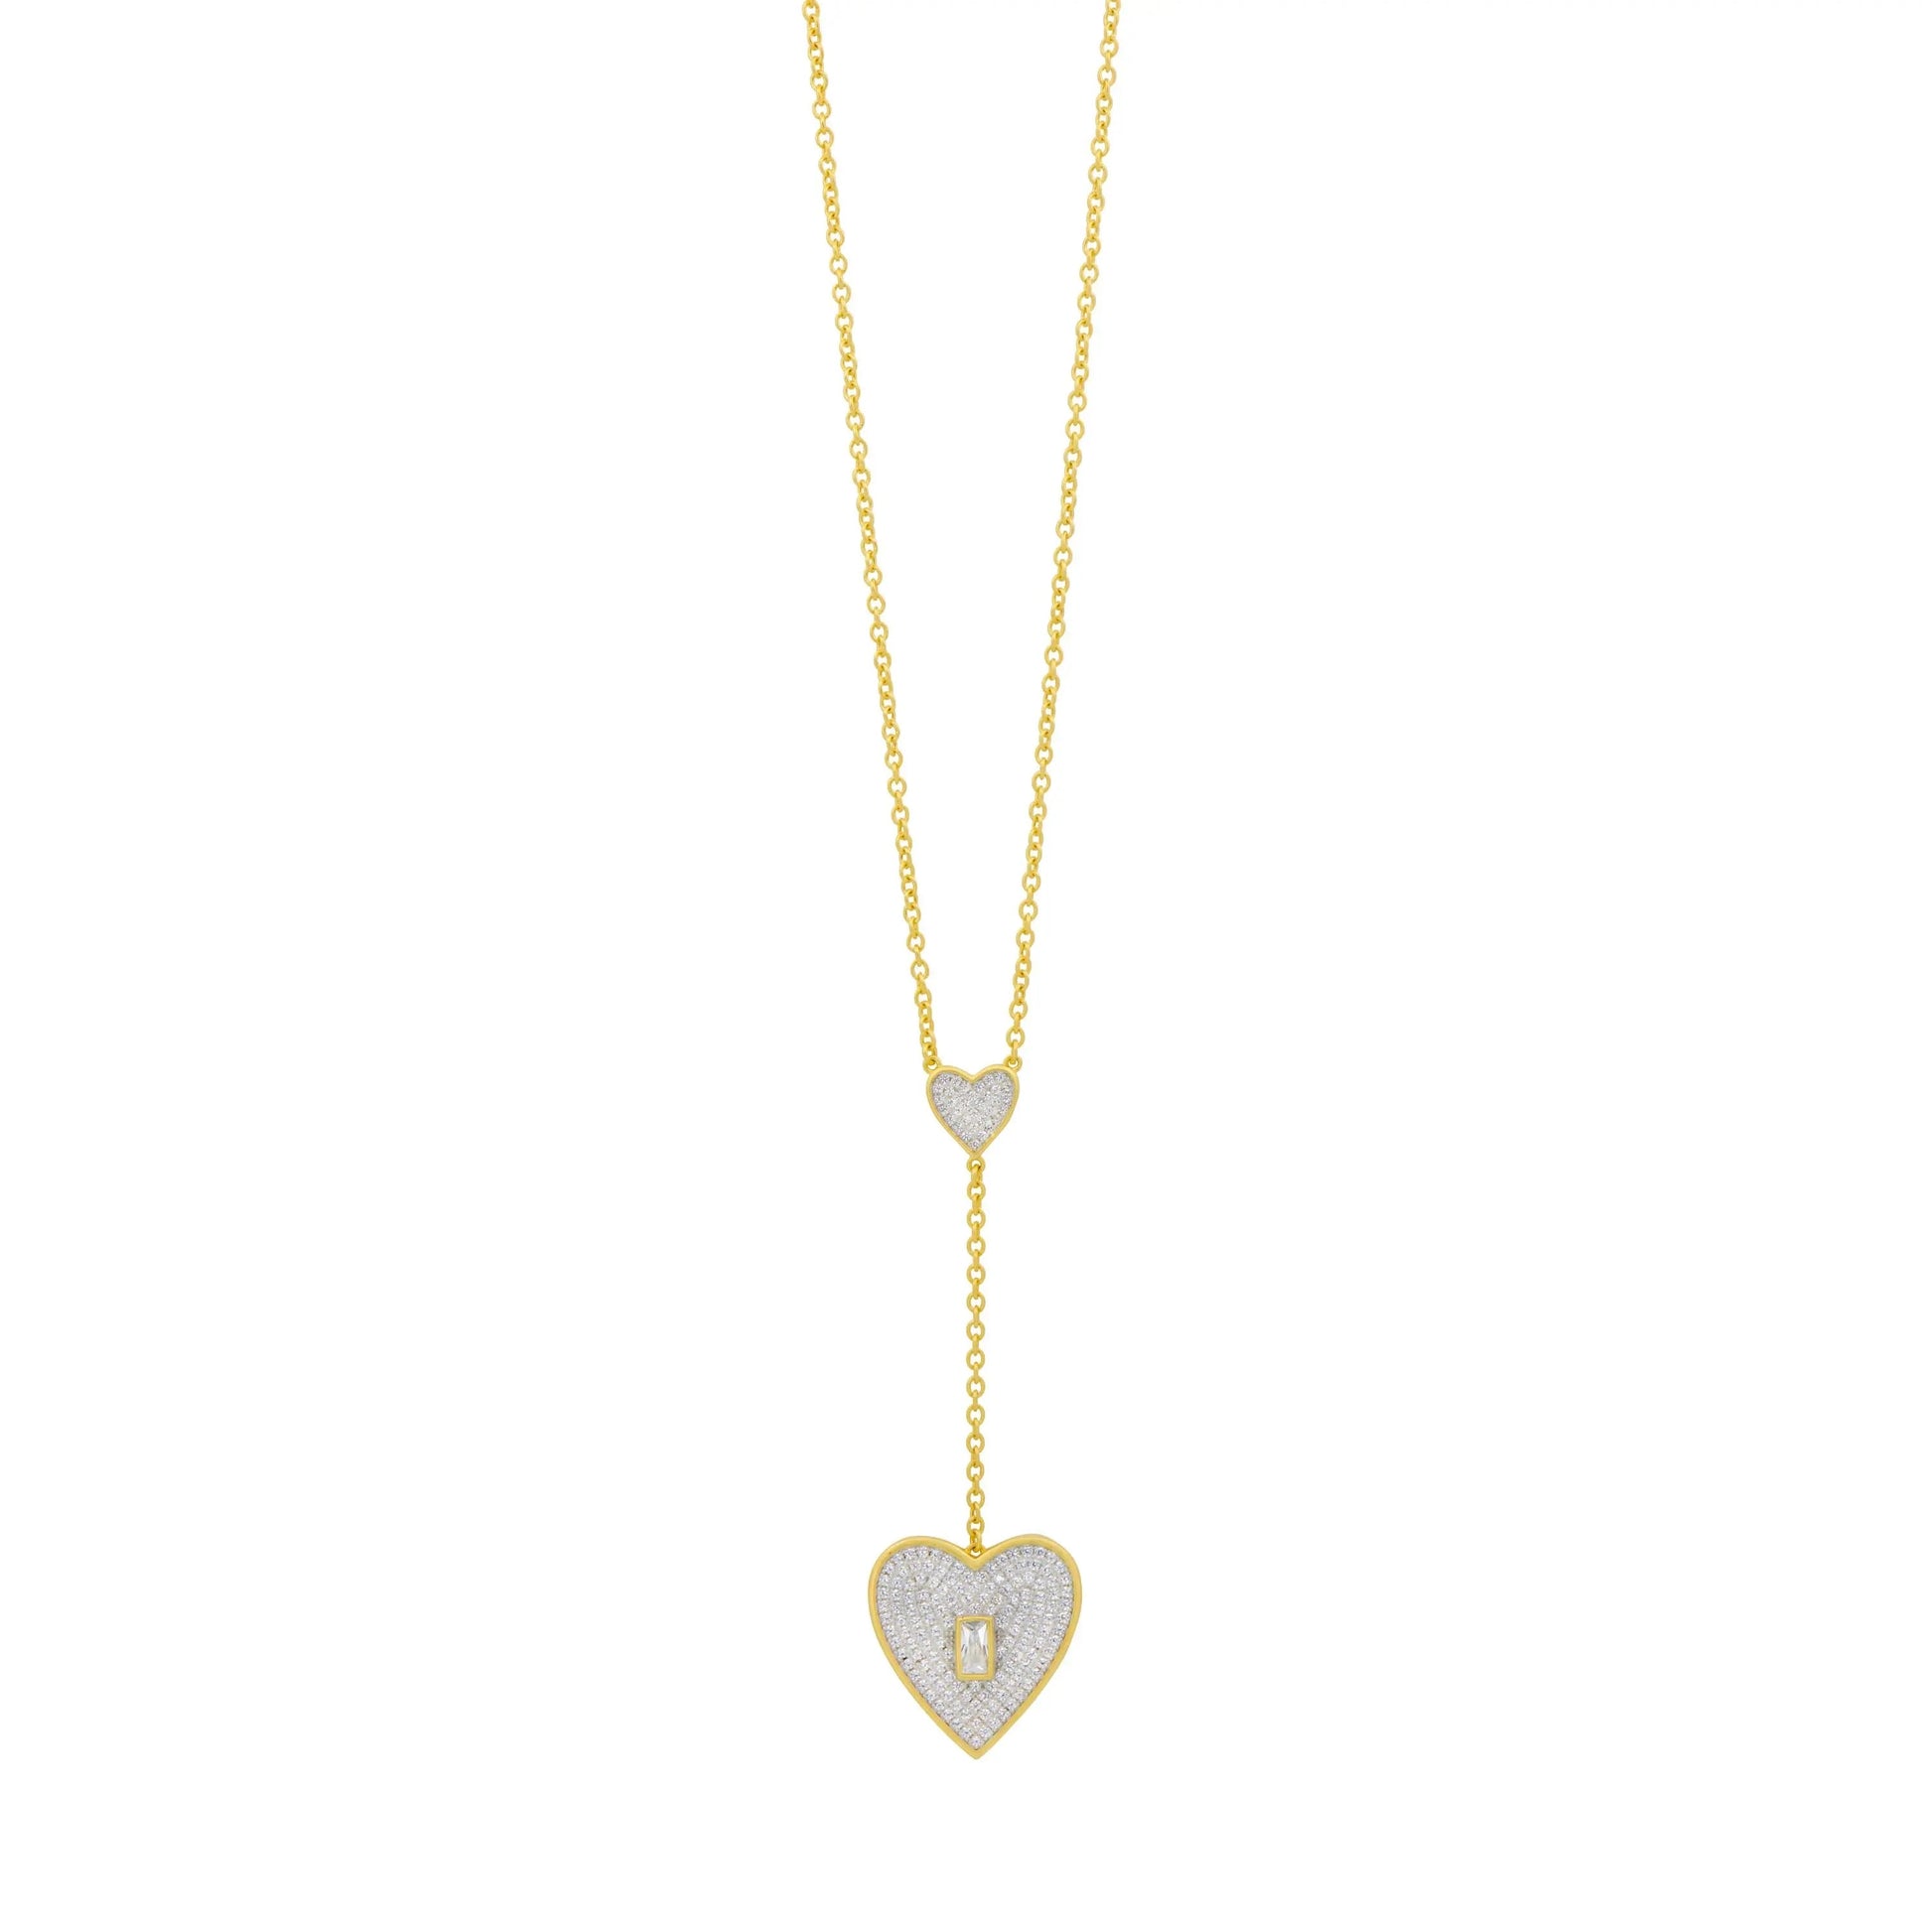  From the Heart Lariat Necklace Valentine's Day Gifts NECKLACE